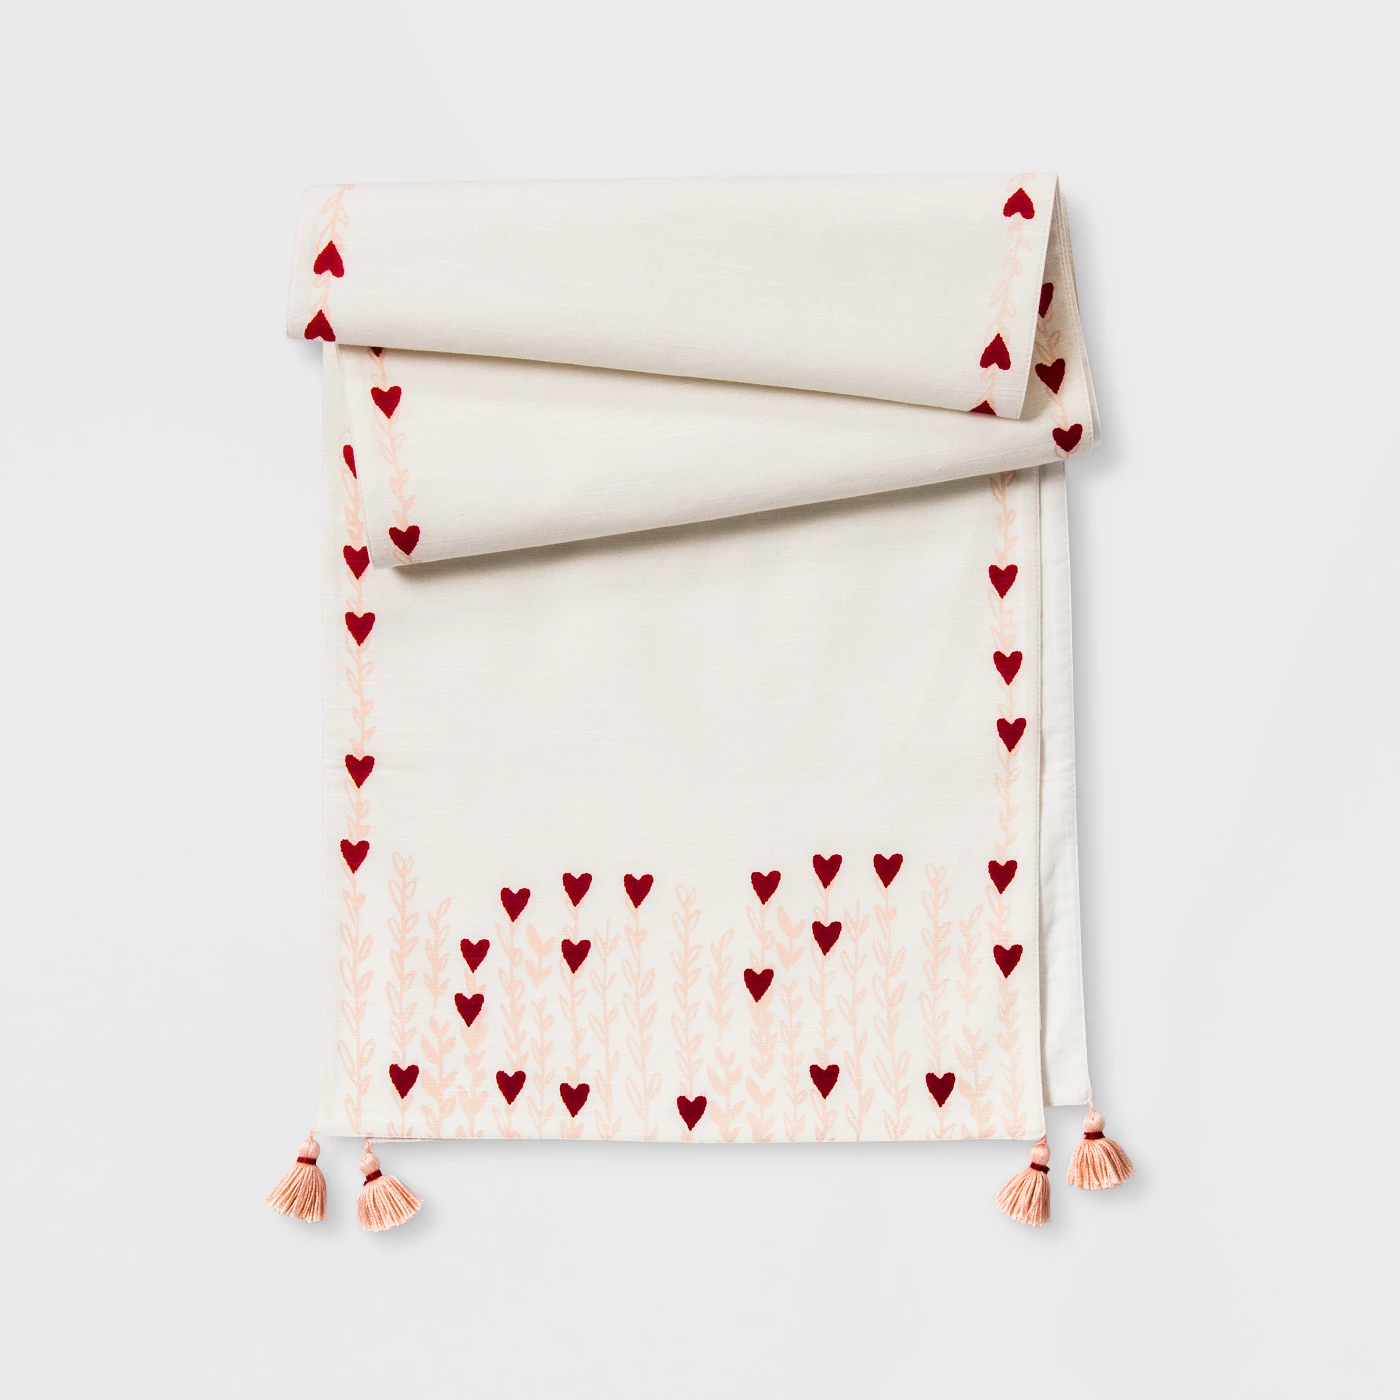 72"x14" Printed Heart With Tassels Table Runner Cream/Pink - Opalhouseâ¢ - image 1 of 2